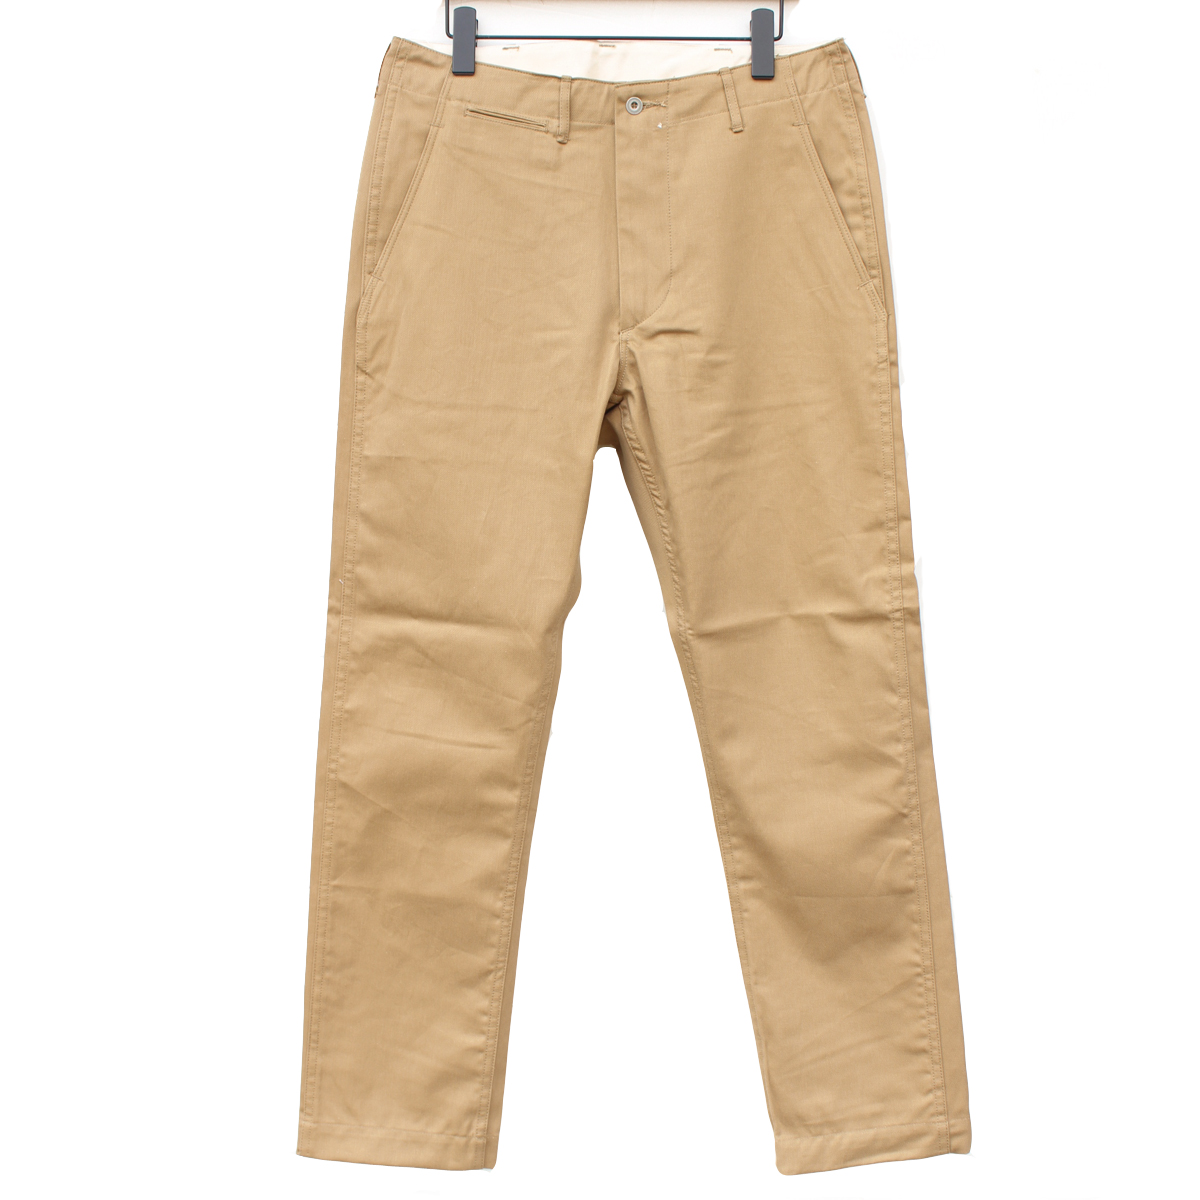 orSlow Slim Fit Army Trouser | PAVEMENT